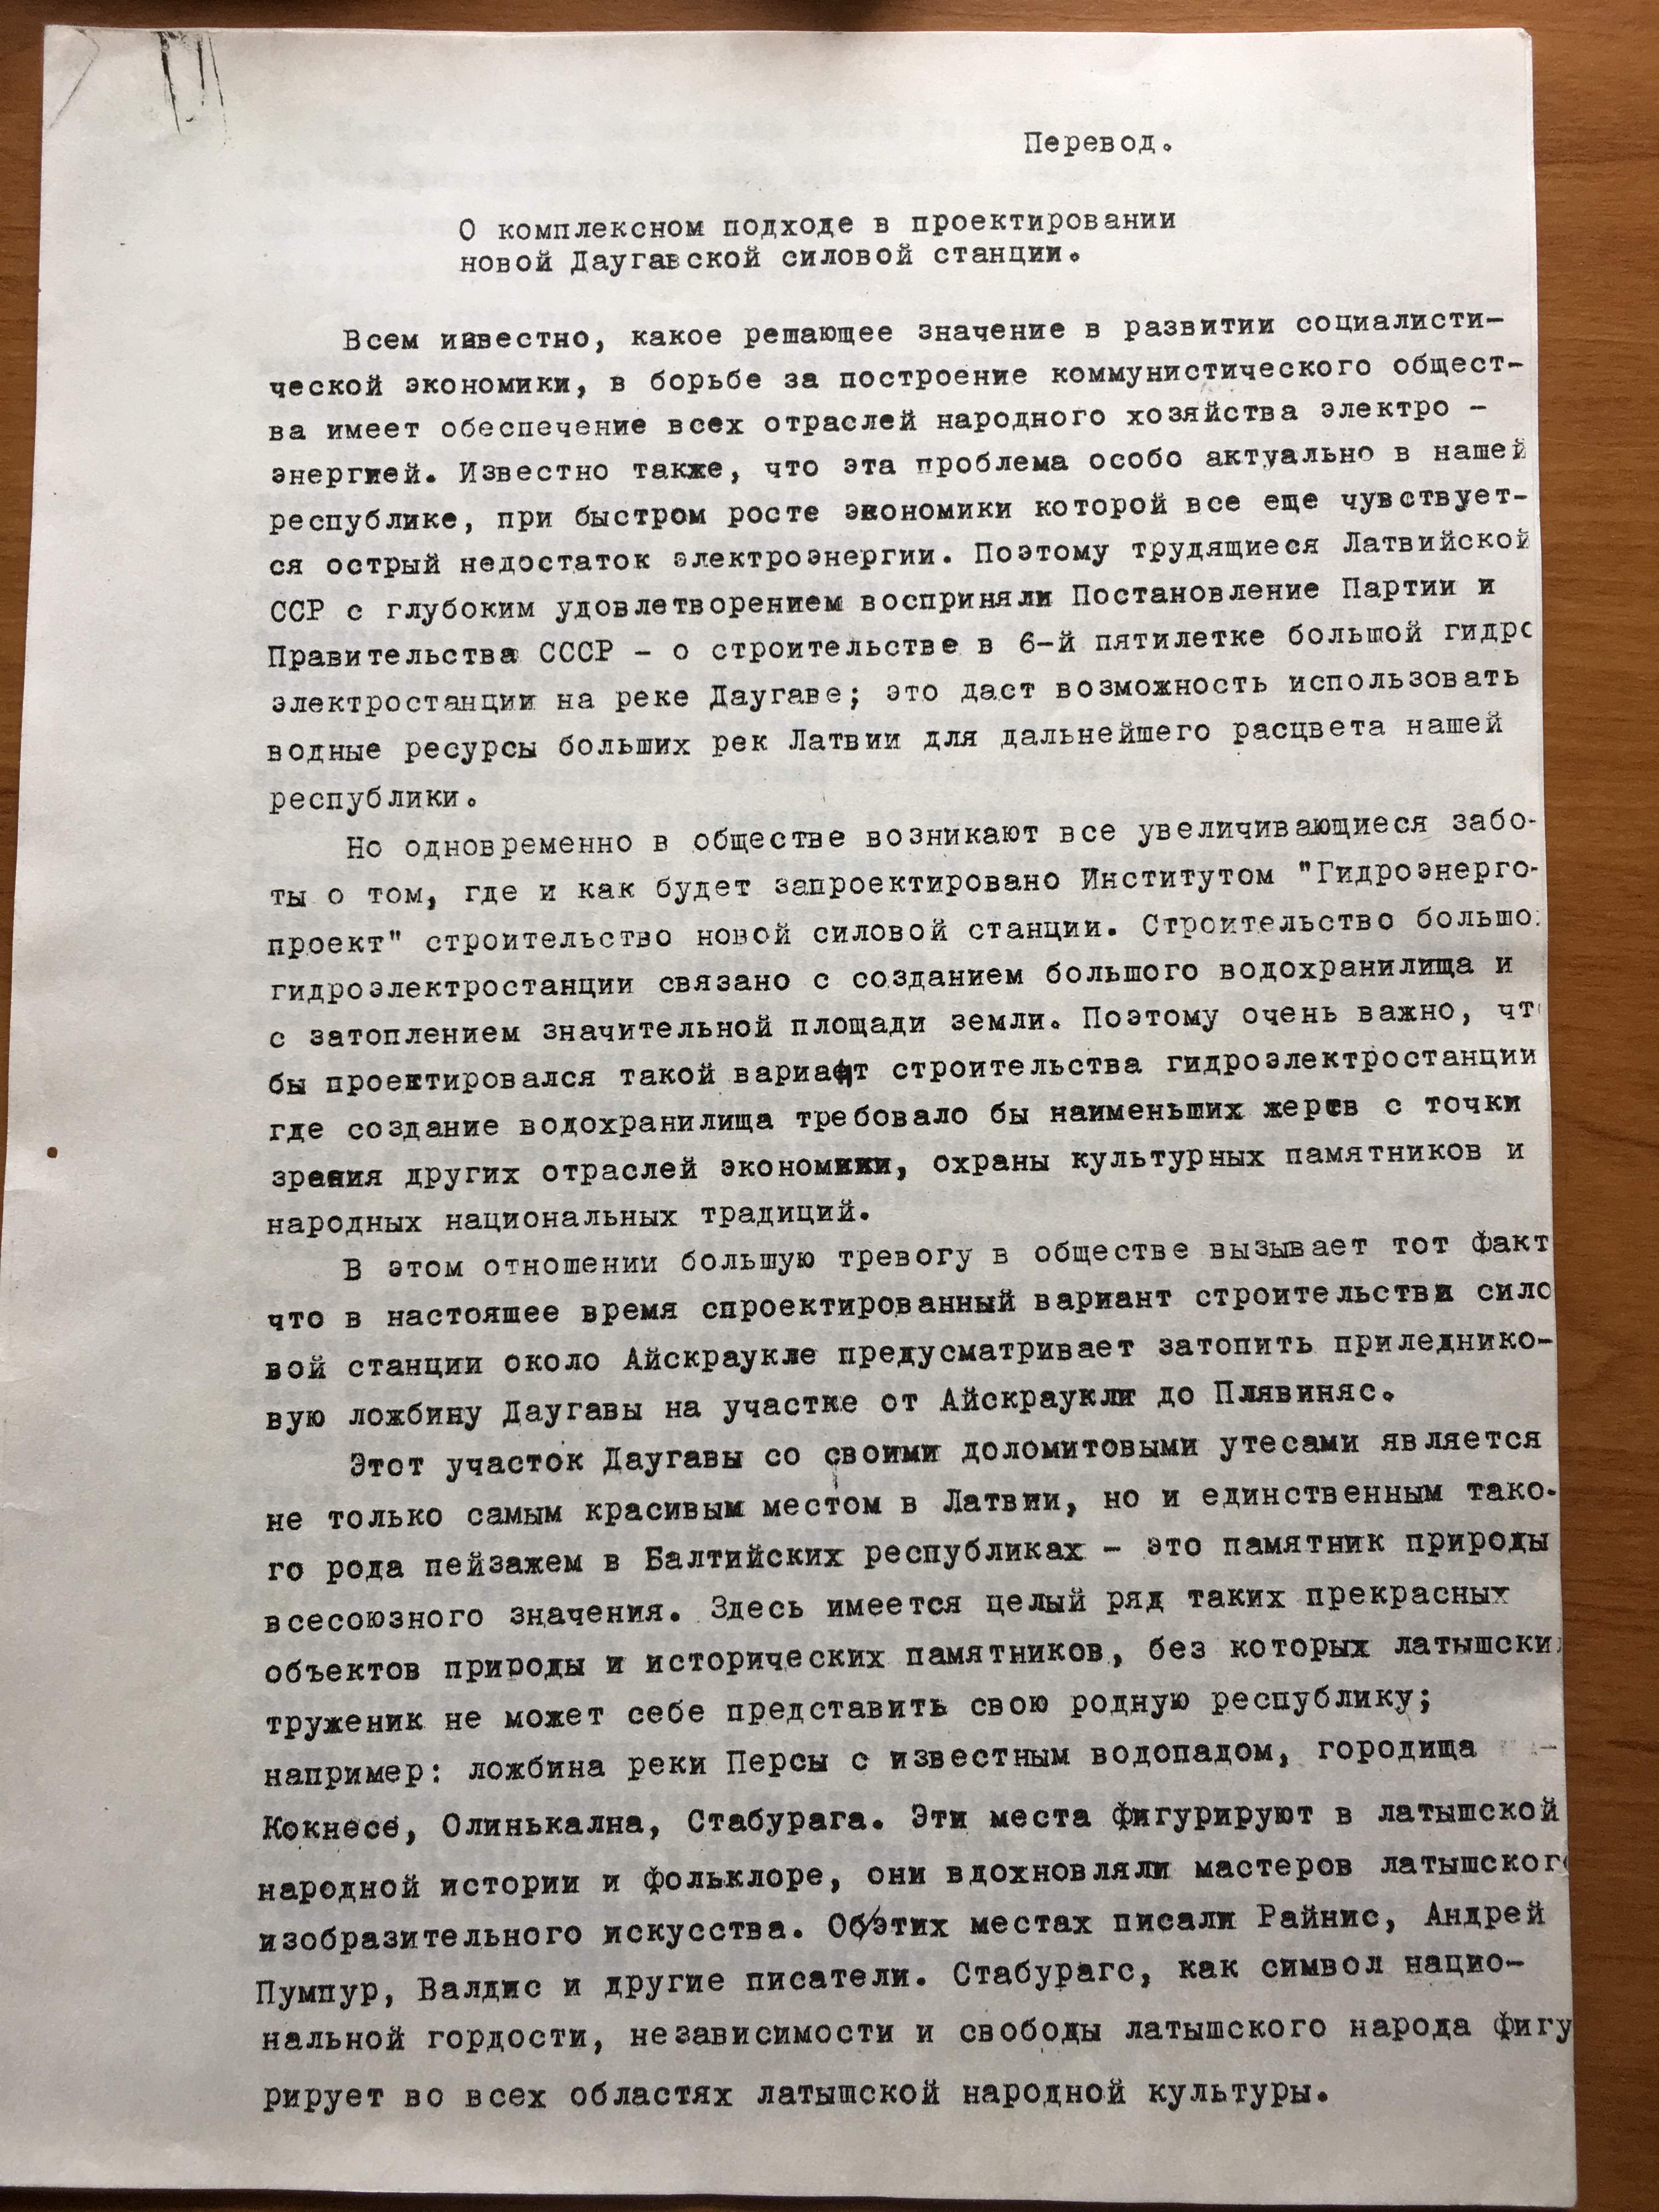 First page of the petition of 55 cultural personalities in 1958 (copy, translation to Russian)